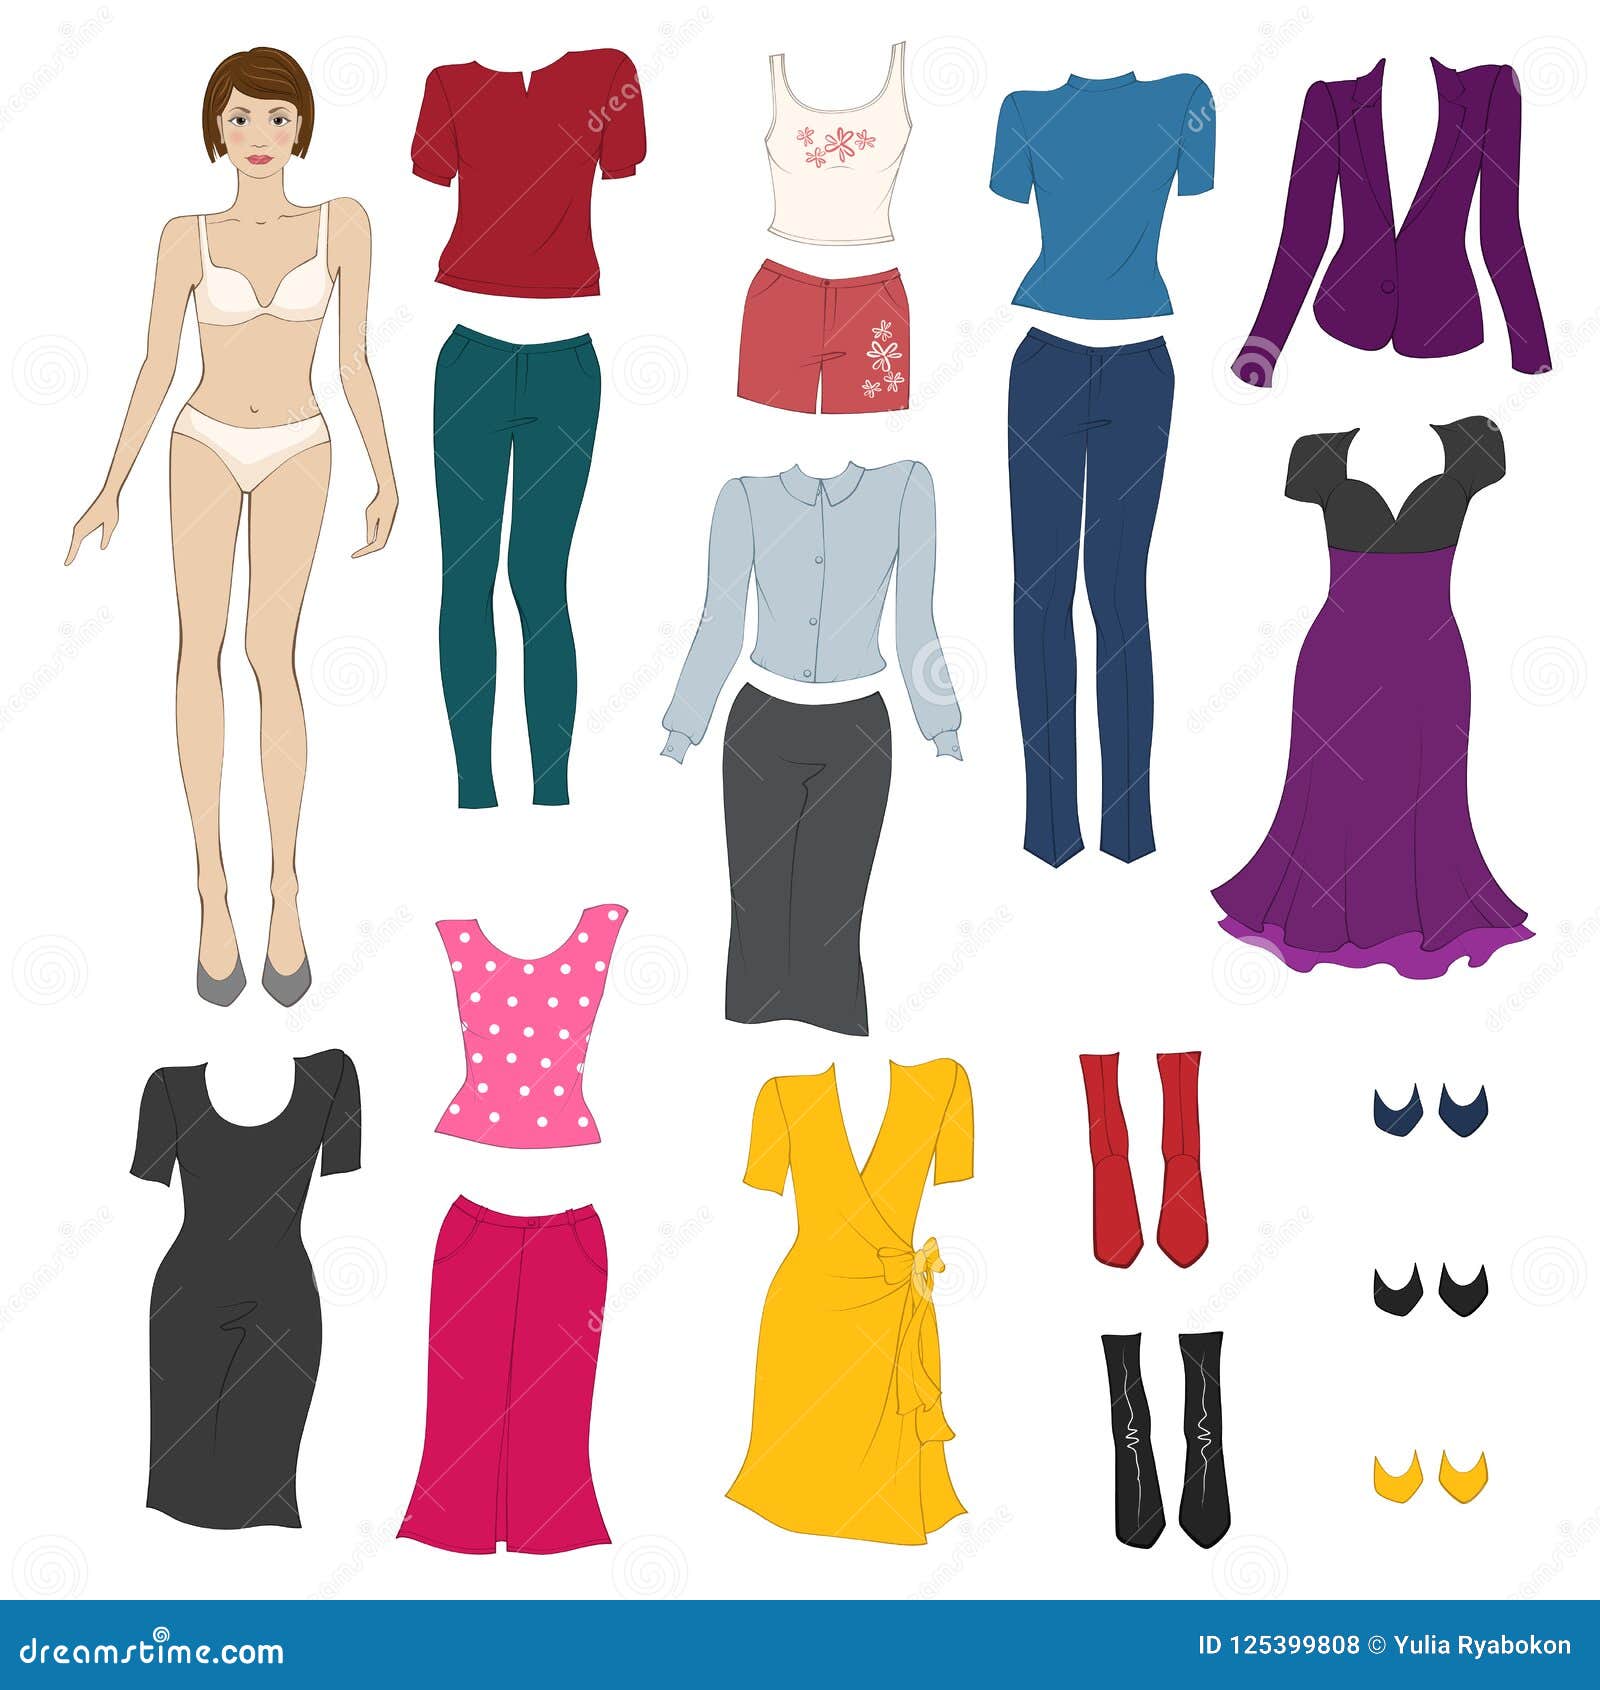 Paper doll with clothes stock illustration. Illustration of cutout ...